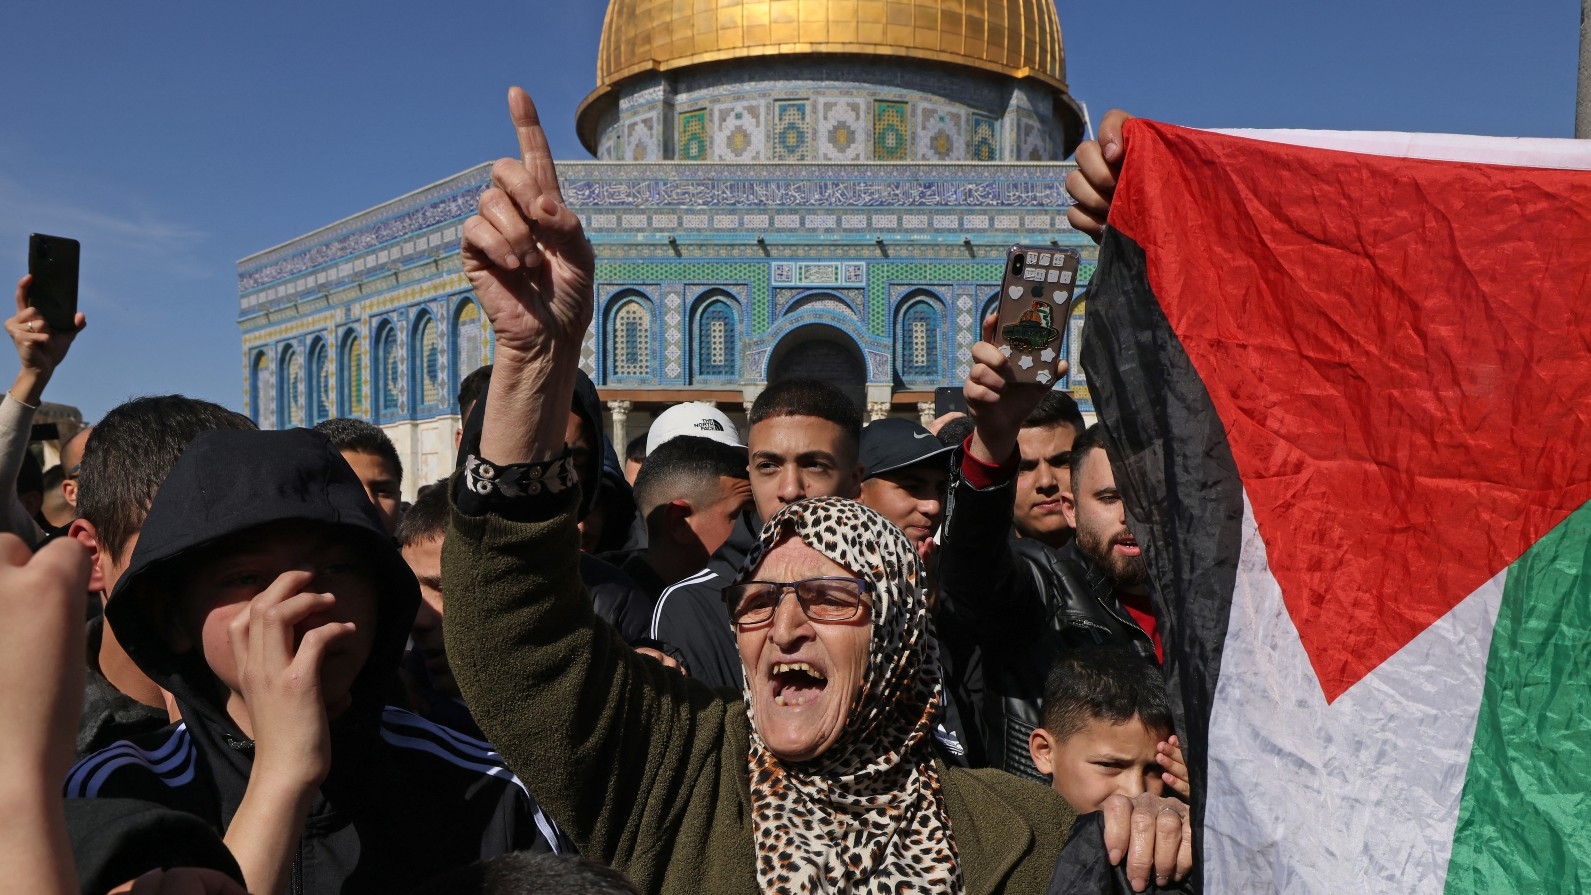 Jerusalem: After 30 years of hope and failure, what's next for Israel/ Palestine?